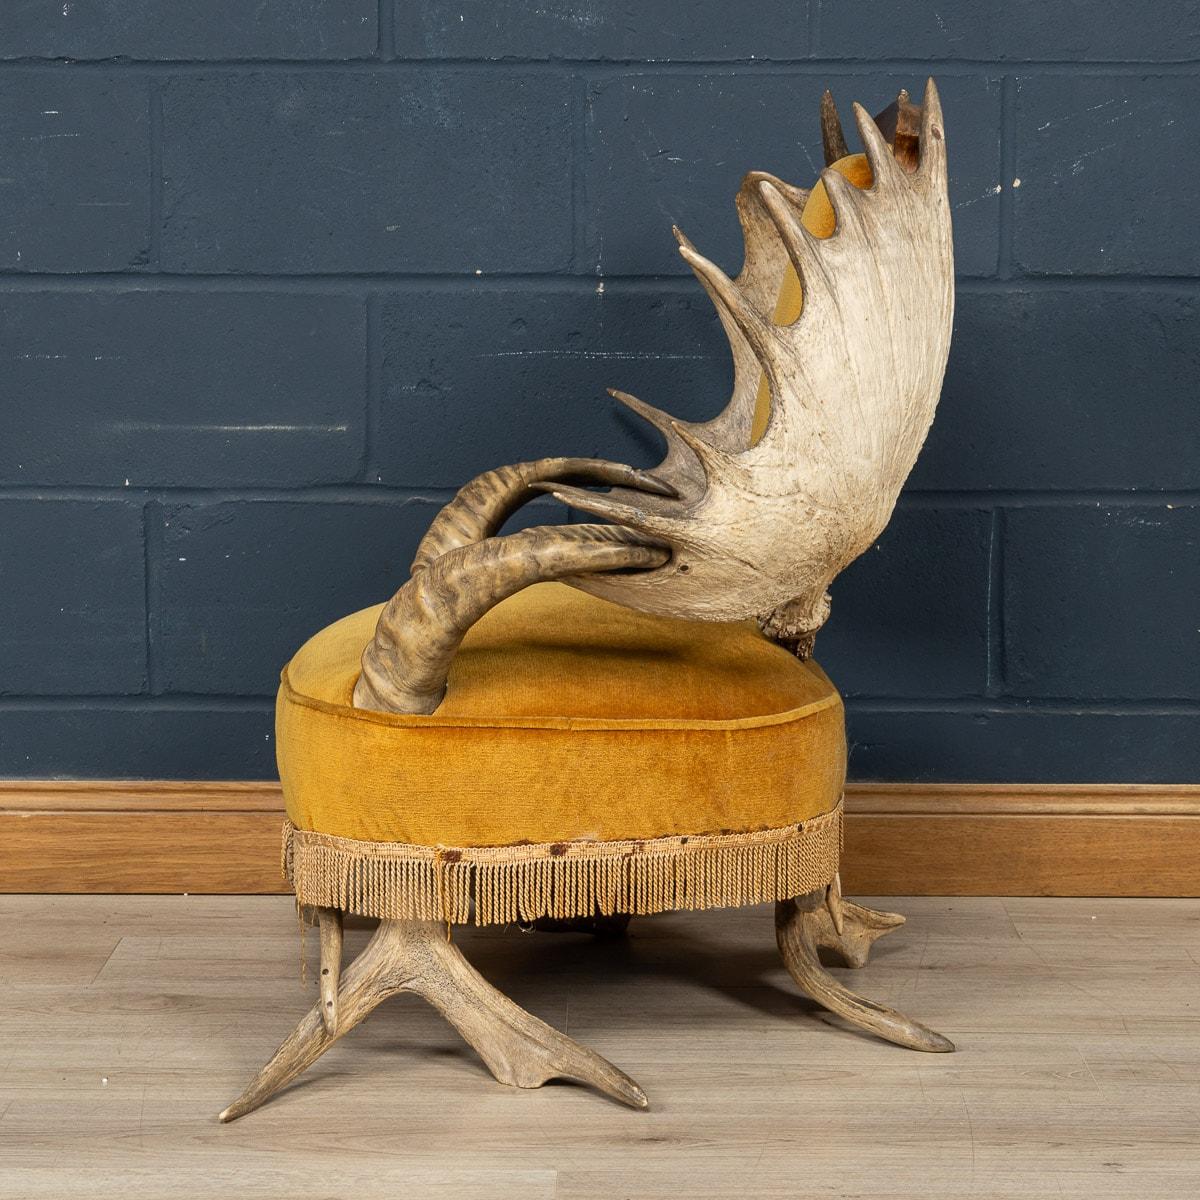 19th Century Swiss-German Black Forest Antler Horn Throne Chair In Good Condition For Sale In Royal Tunbridge Wells, Kent